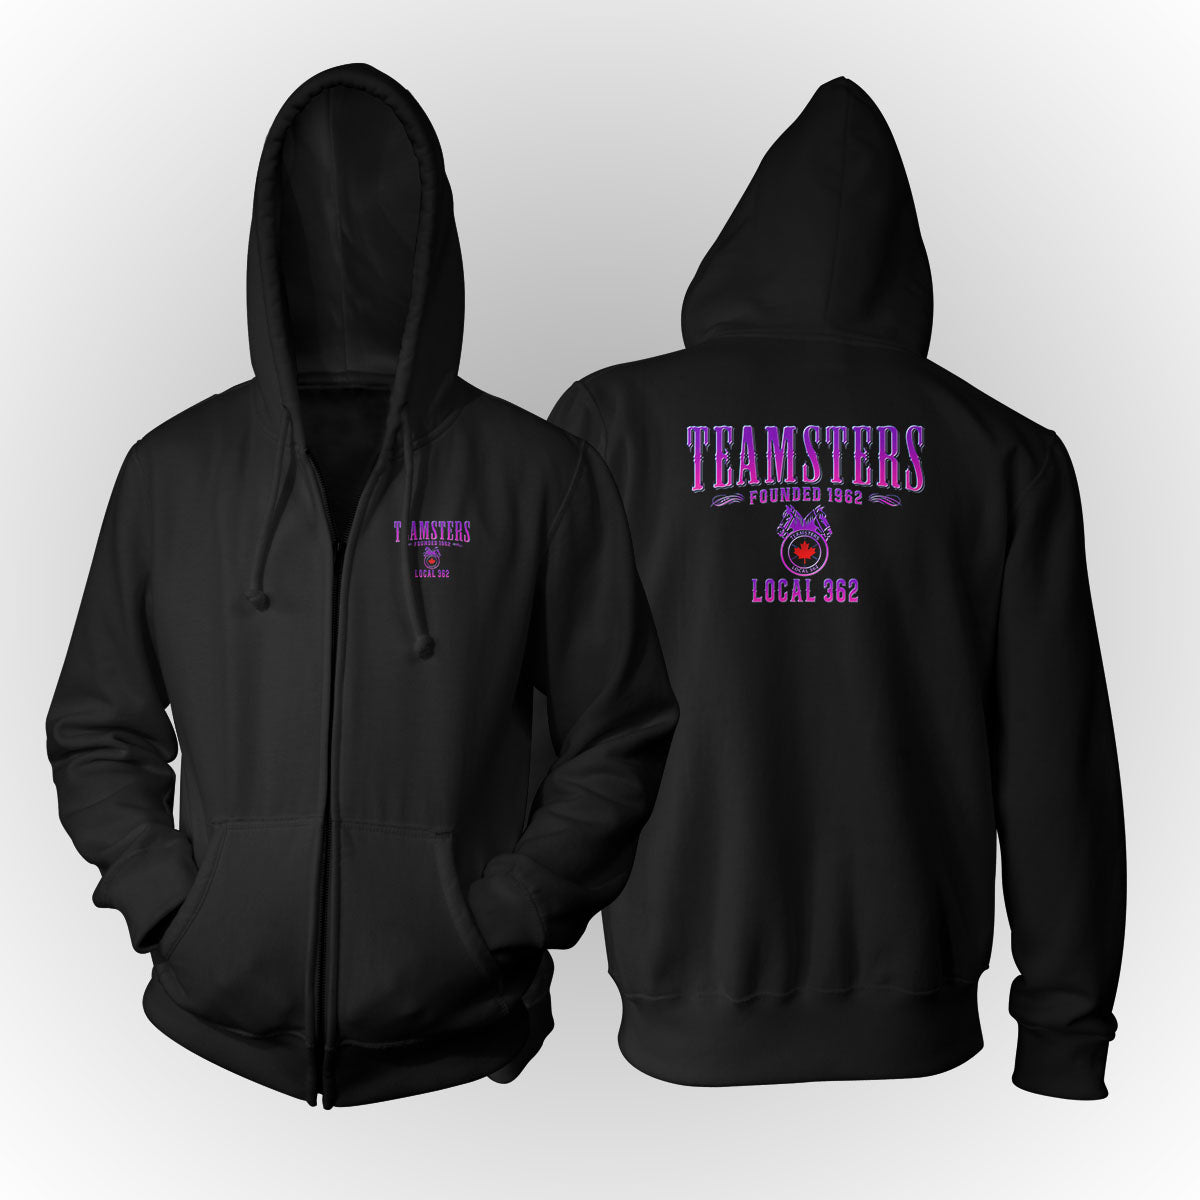 Teamsters 362 - Founded Pink Apparel